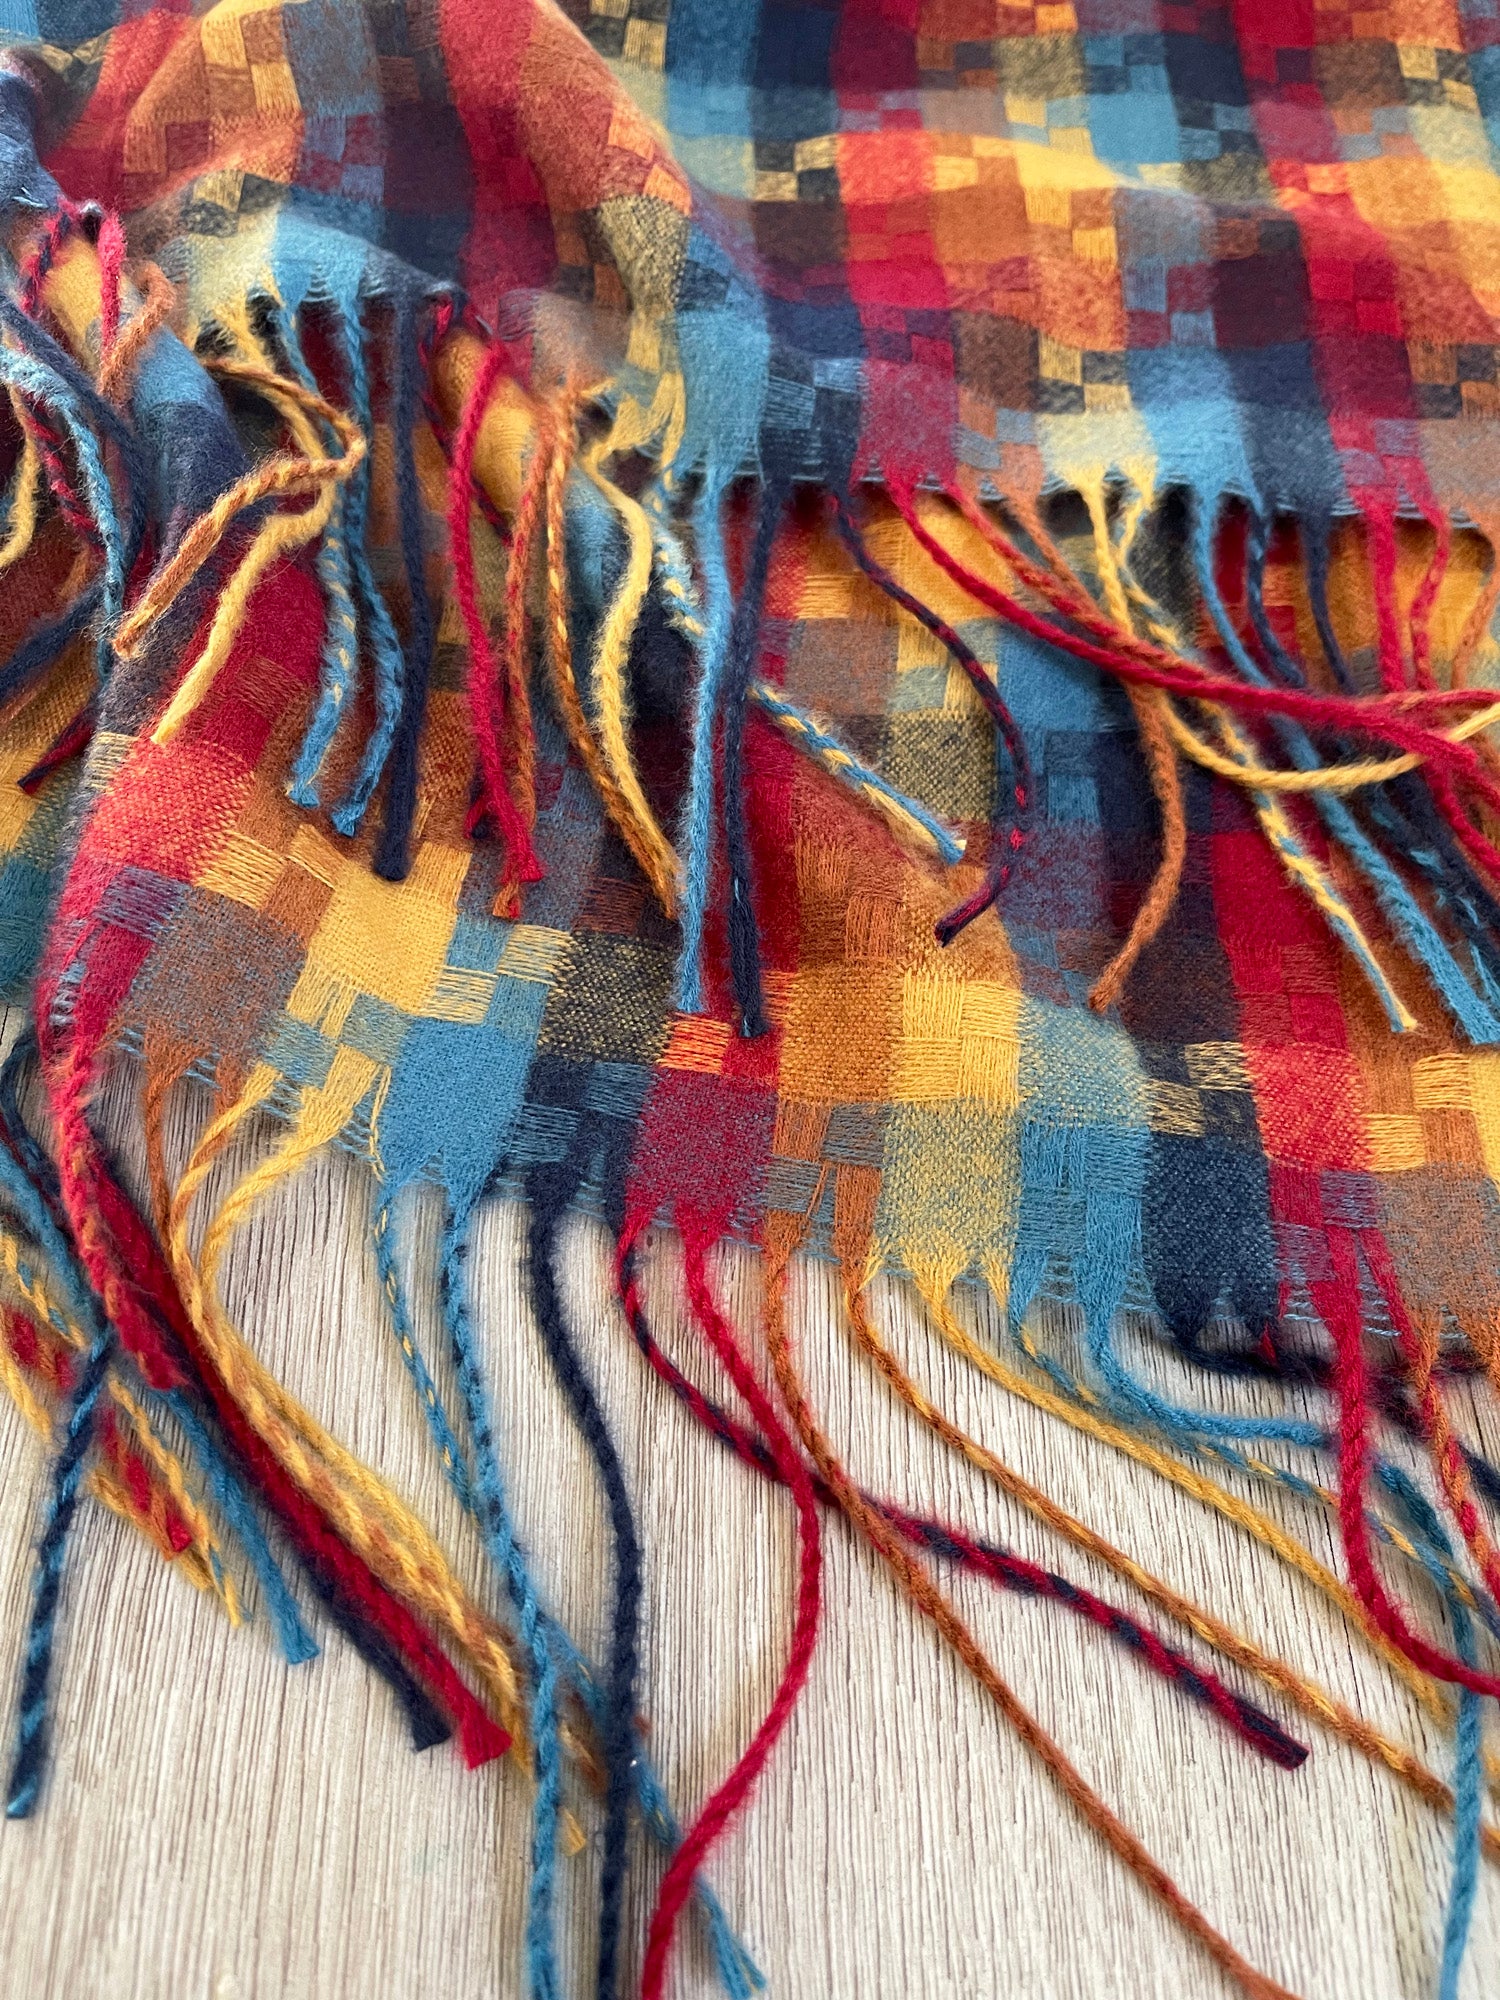 LONG RED MULTICOLOUR WOOL MIX CHECKED TARTAN SCARF